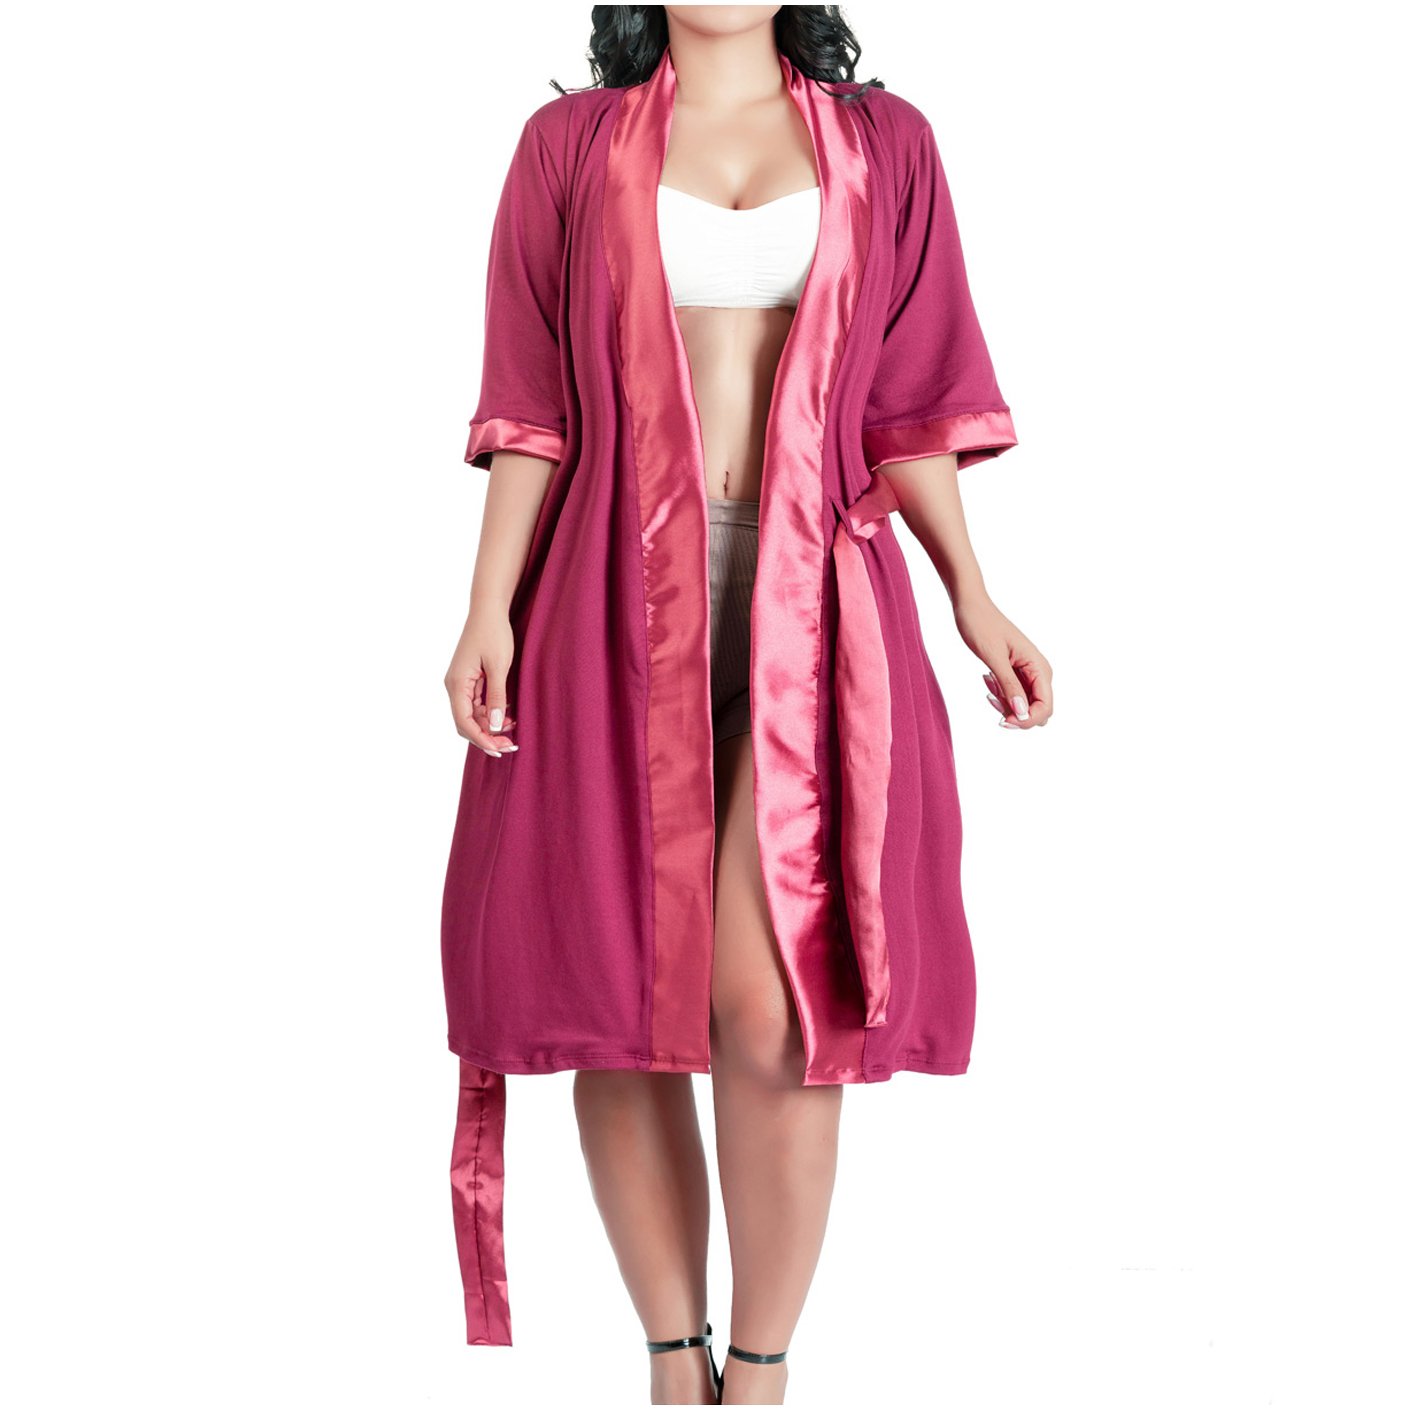 Top-Quality Robes for a Safe and Stylish Recovery